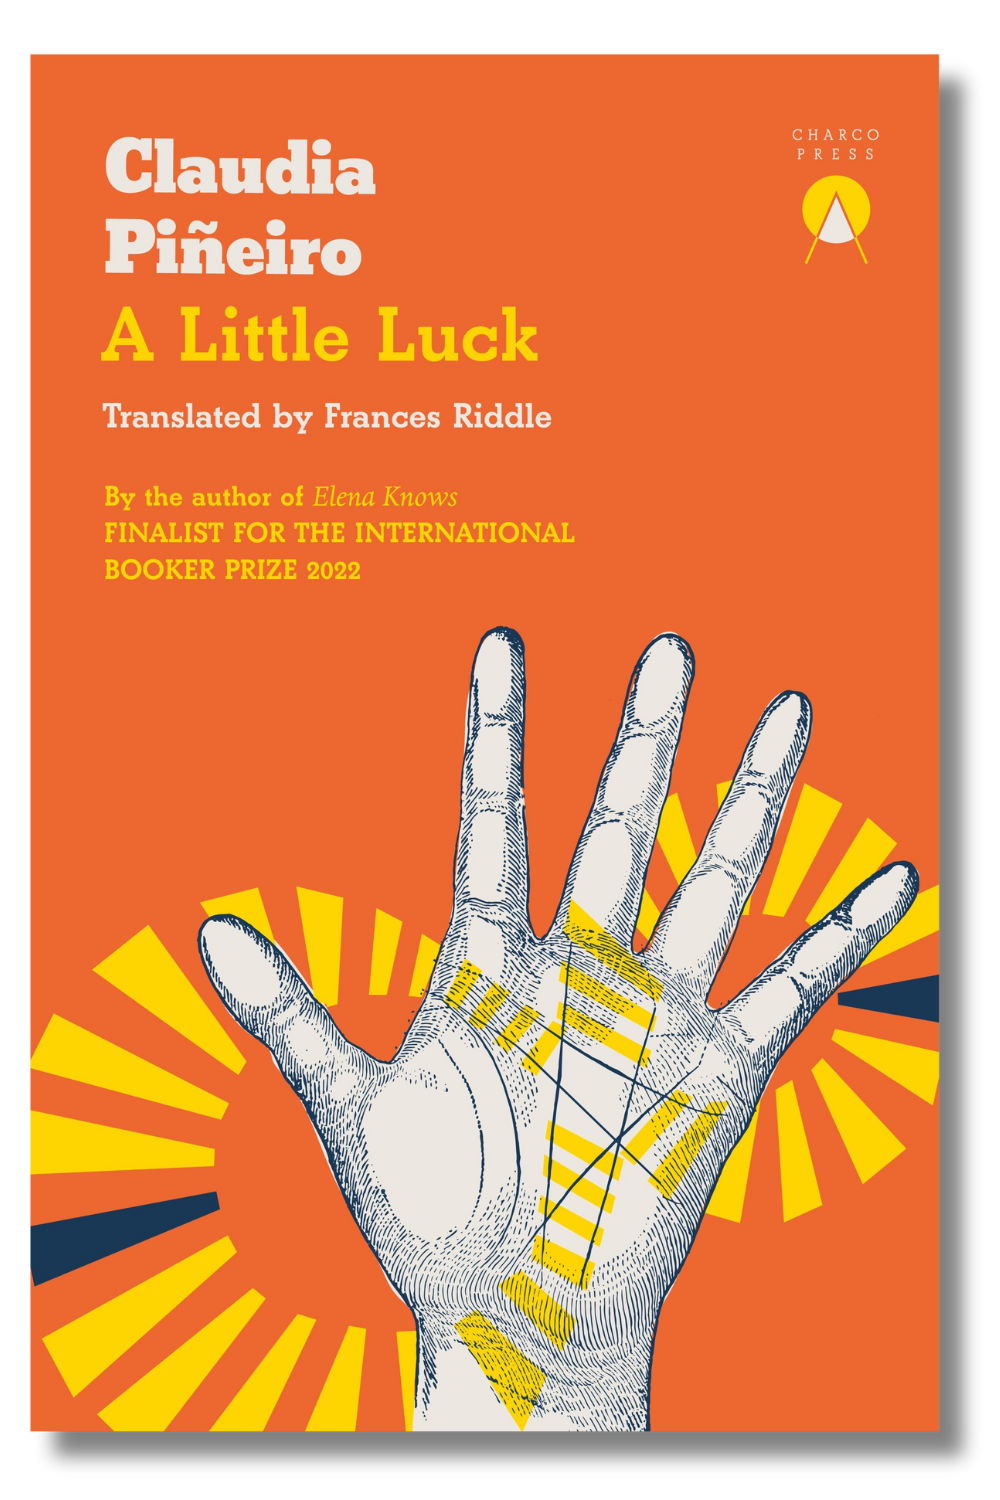 The cover of "A Little Luck" by Claudia Piñeiro, translated by Frances Riddle